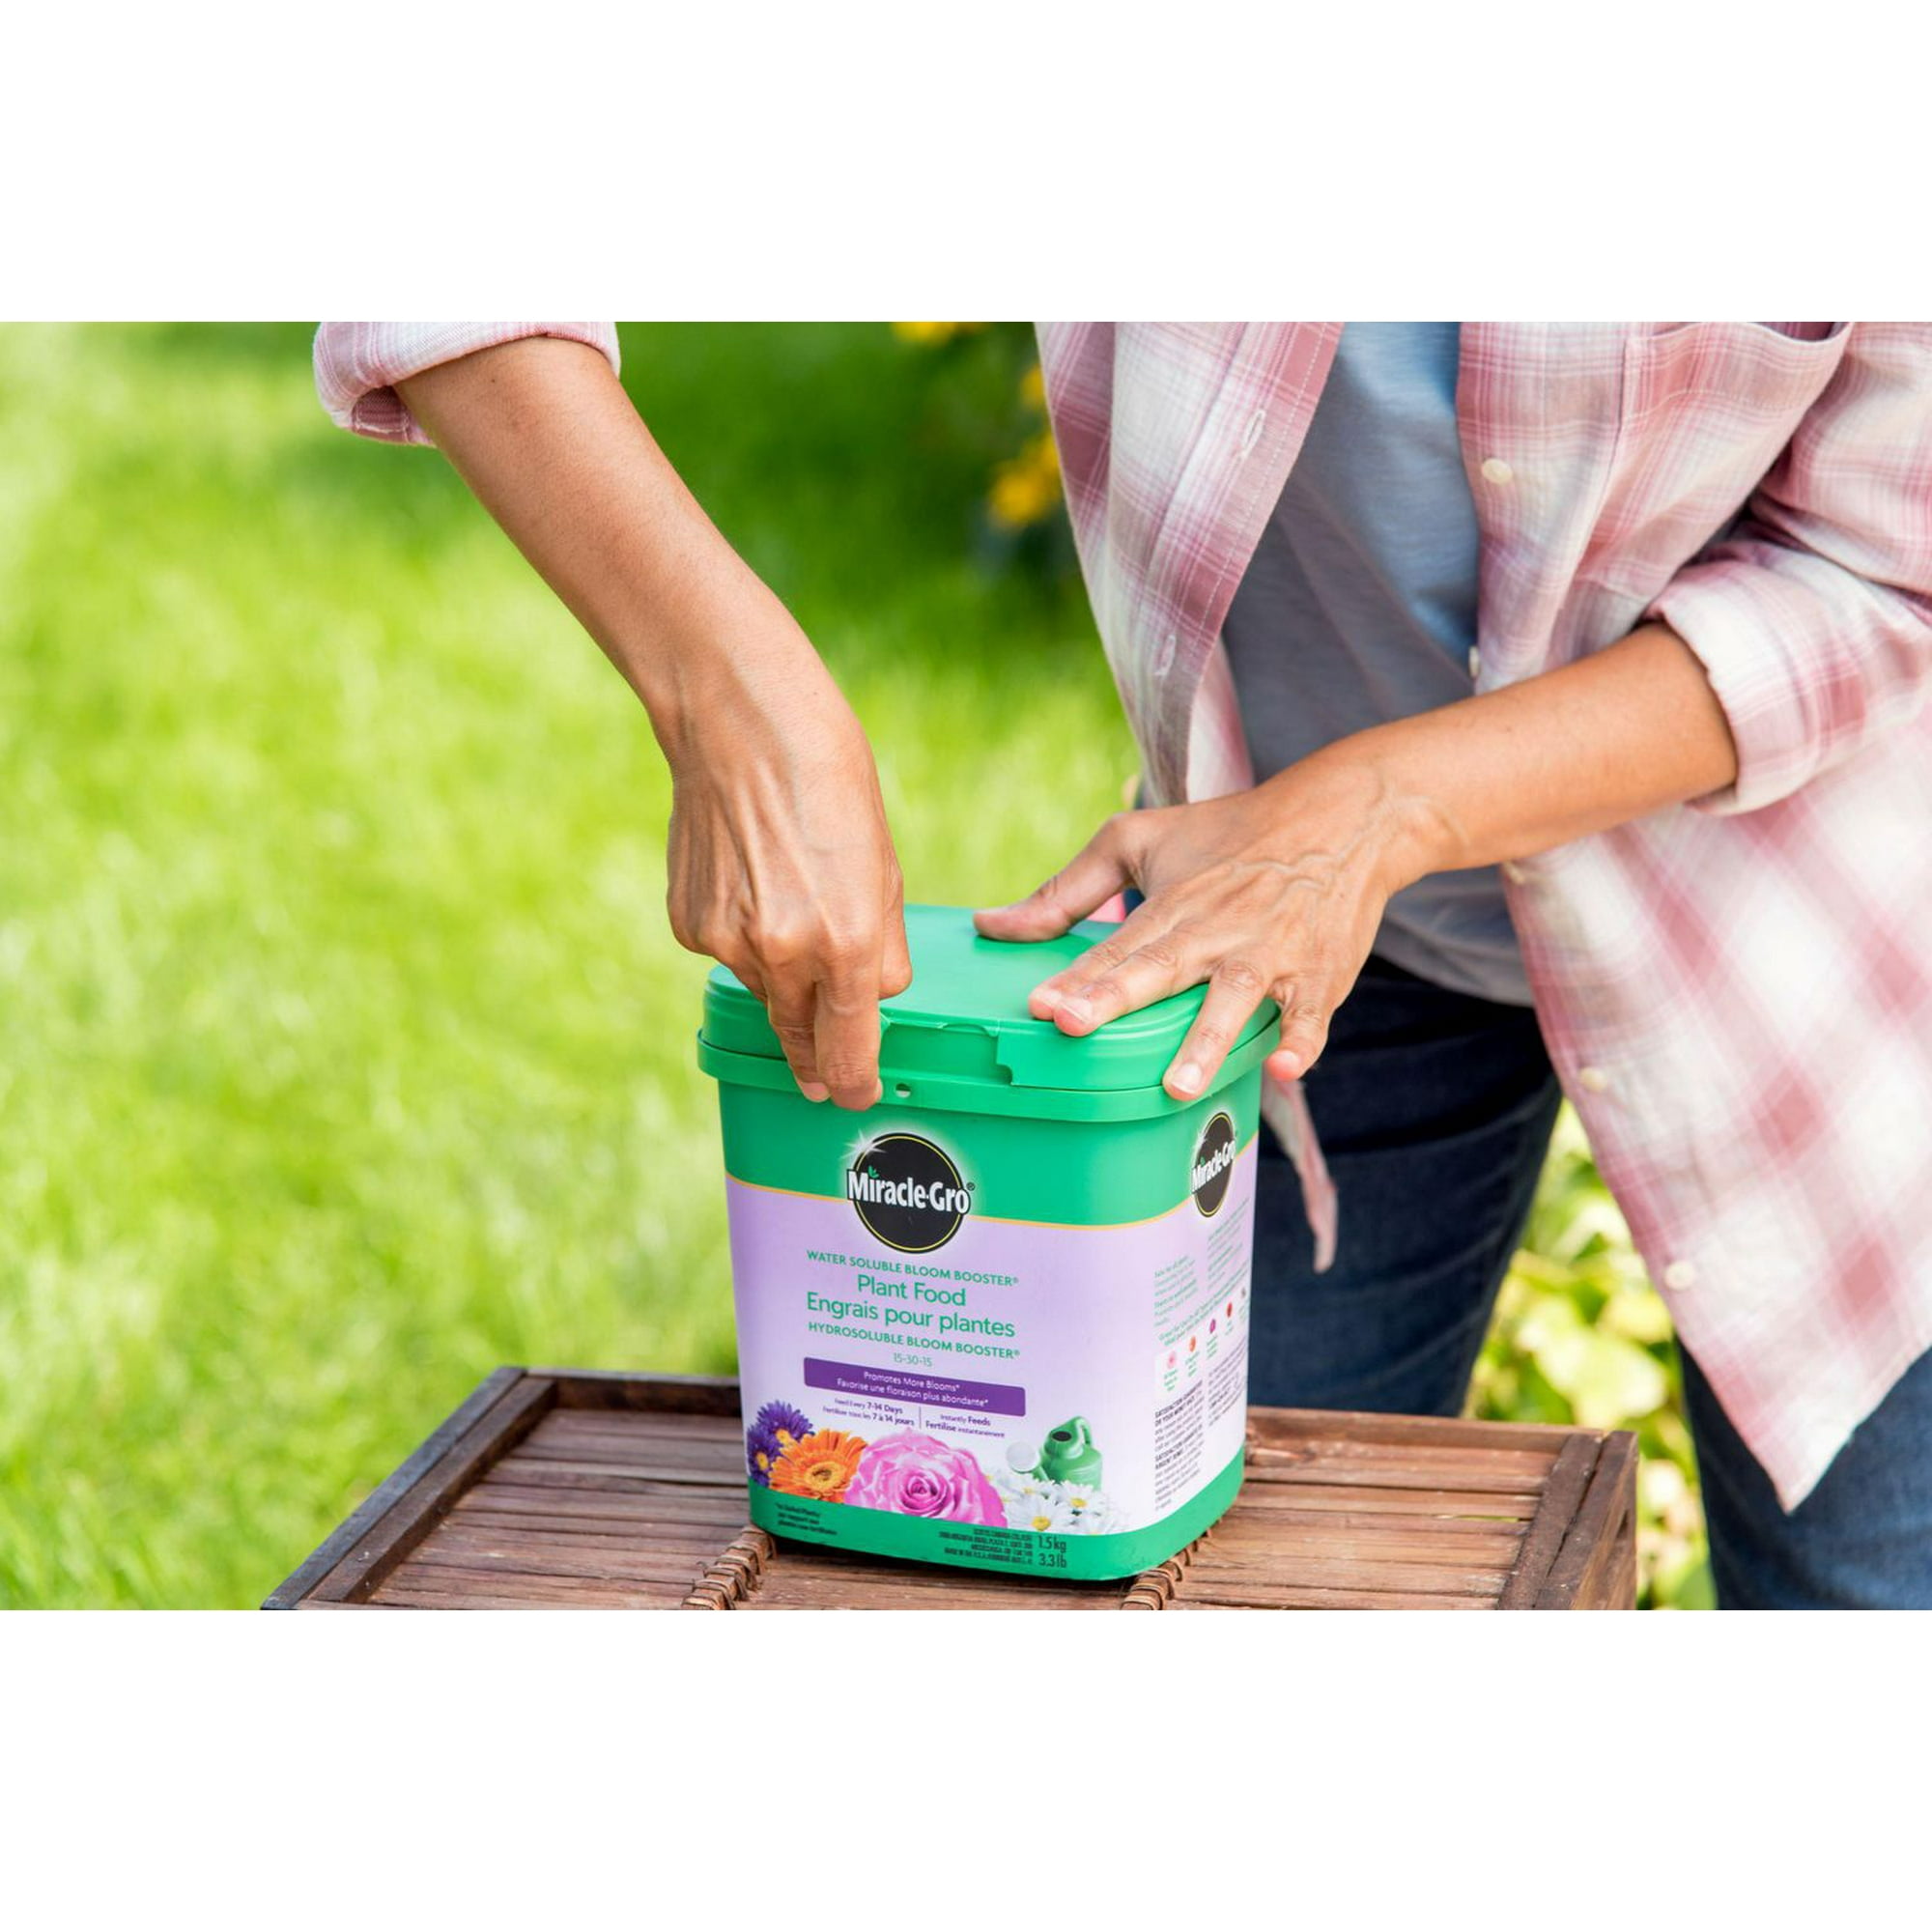 Miracle-Gro Water Soluble Bloom Booster Plant Food - 1.5kg, Feeds